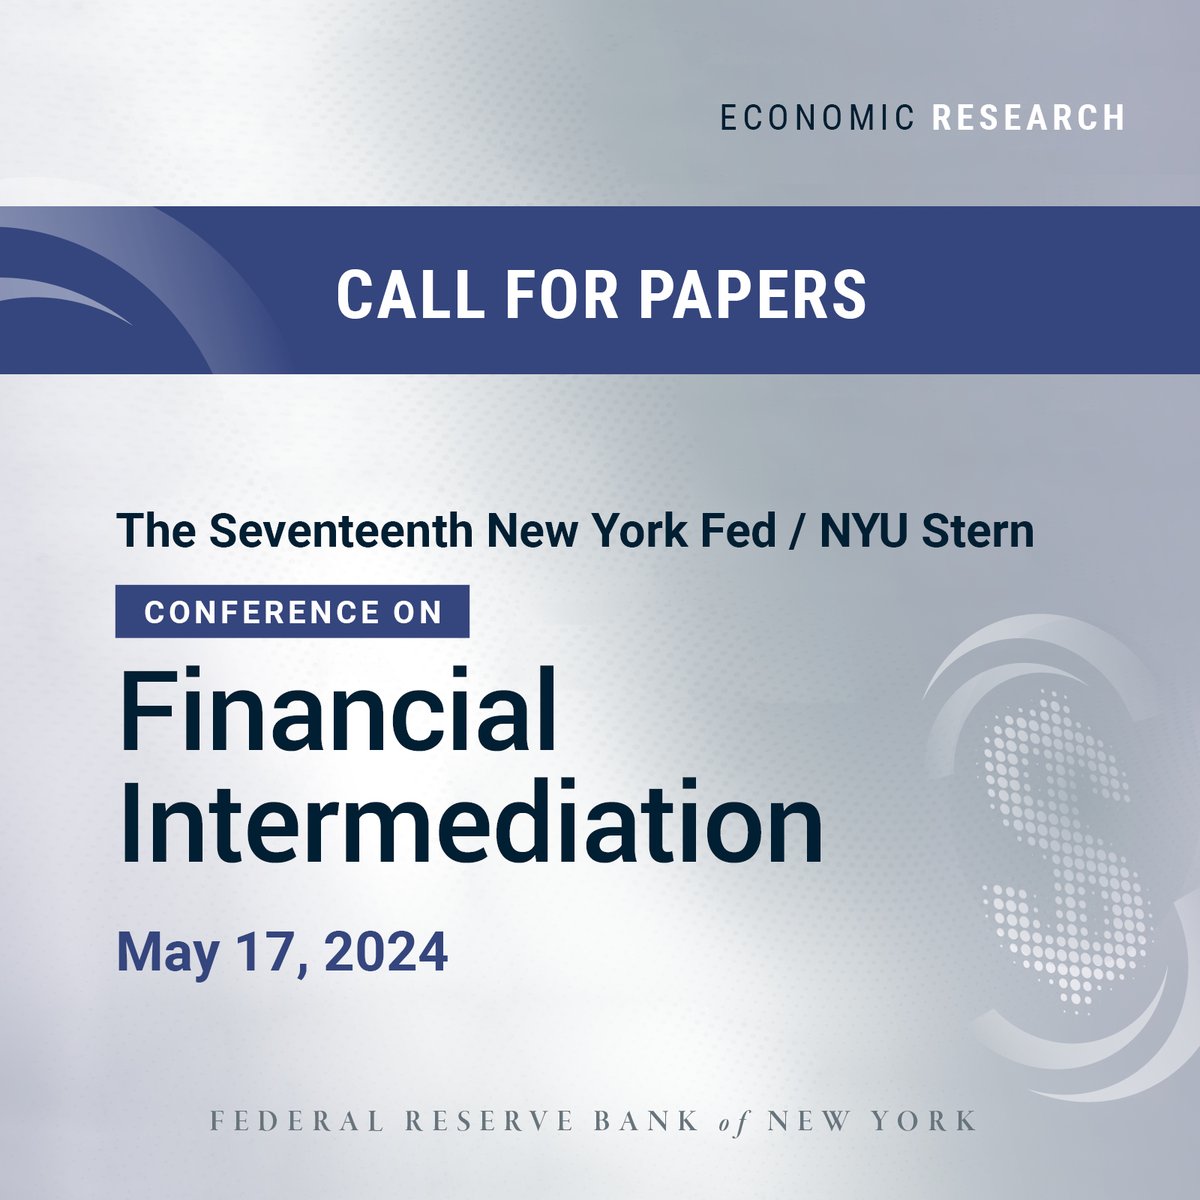 Take note of a #CallforPapers for our joint conference on financial intermediation in May 2024. Submissions through Jan 15 in all areas of financial intermediation will be considered. Details: bit.ly/3uz51Yl Co-organizers ⊃ @StephanLuck @schnabl_econ @SimoneLenzu